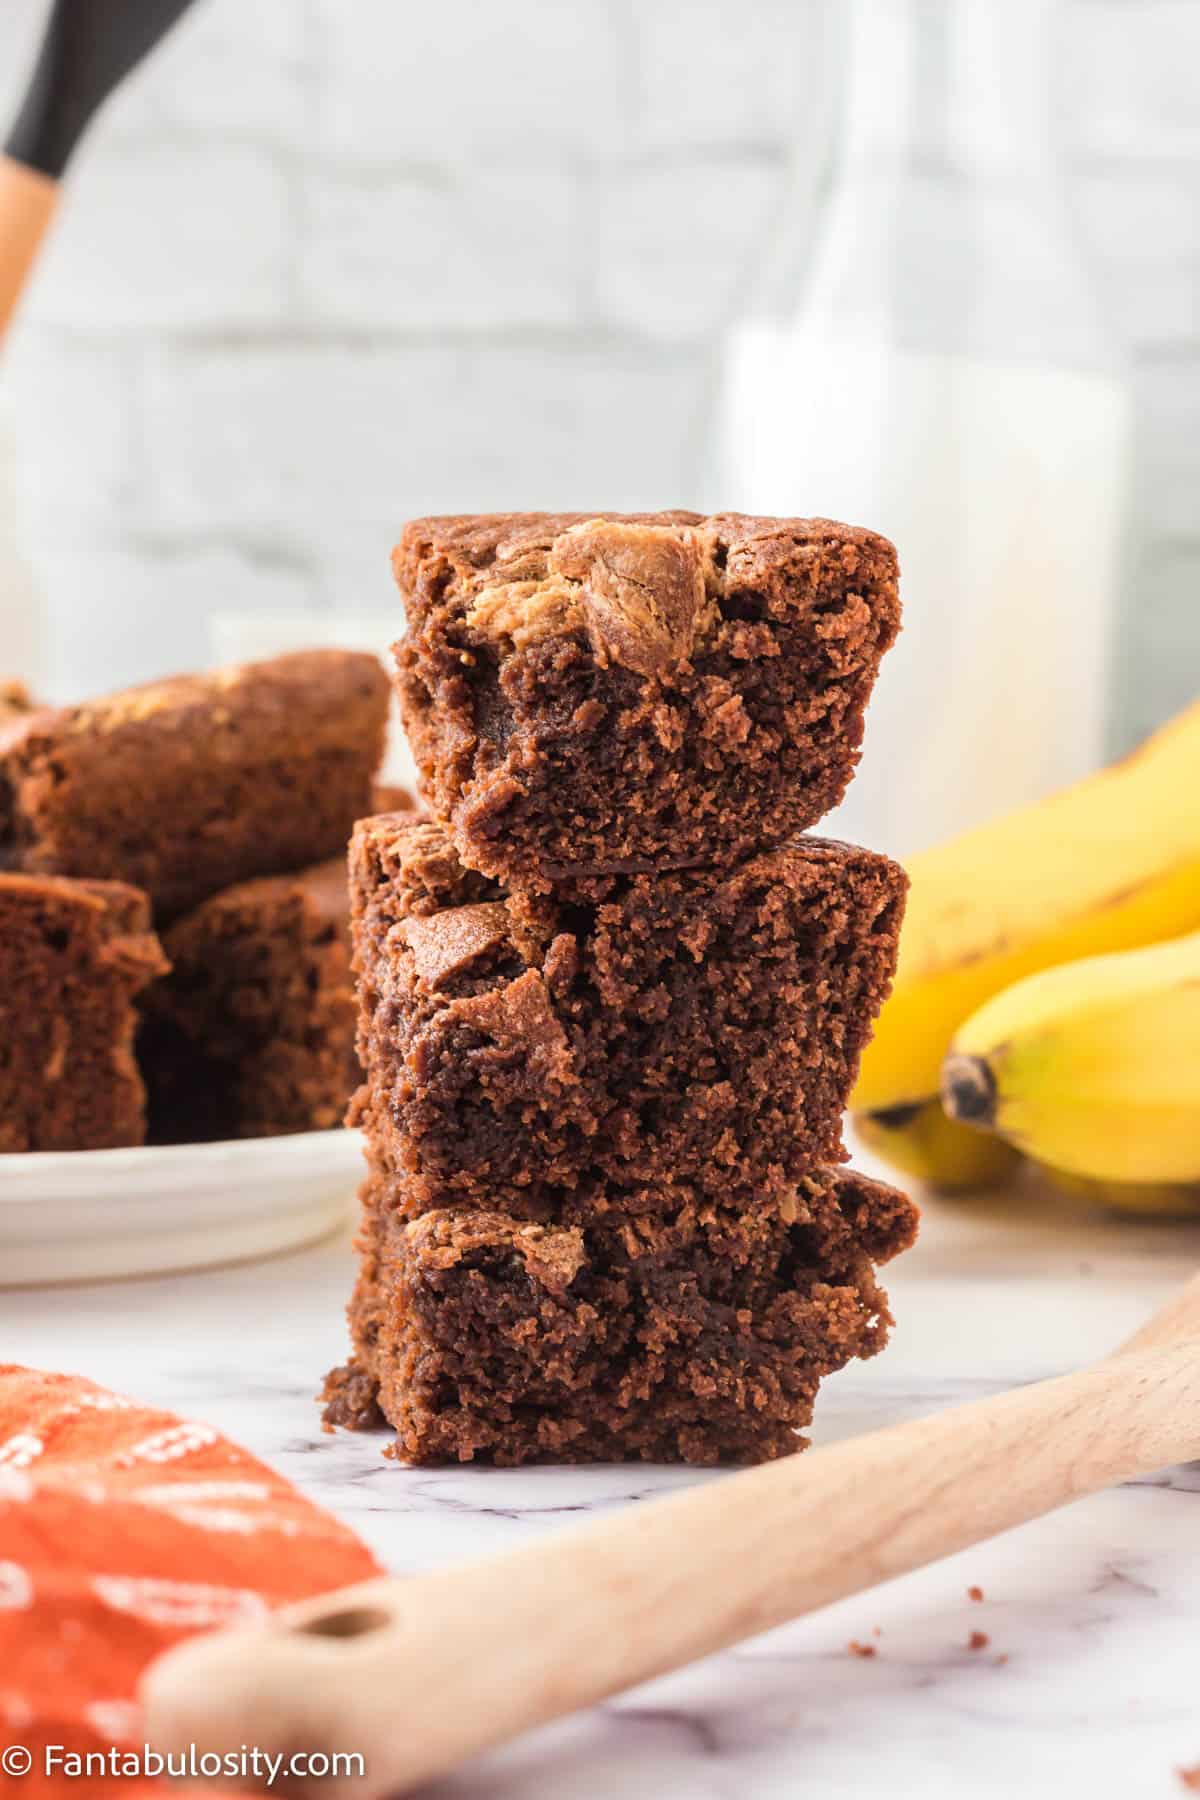 A stack of brownies with a plate of brownies and bunch of bananas in the background.